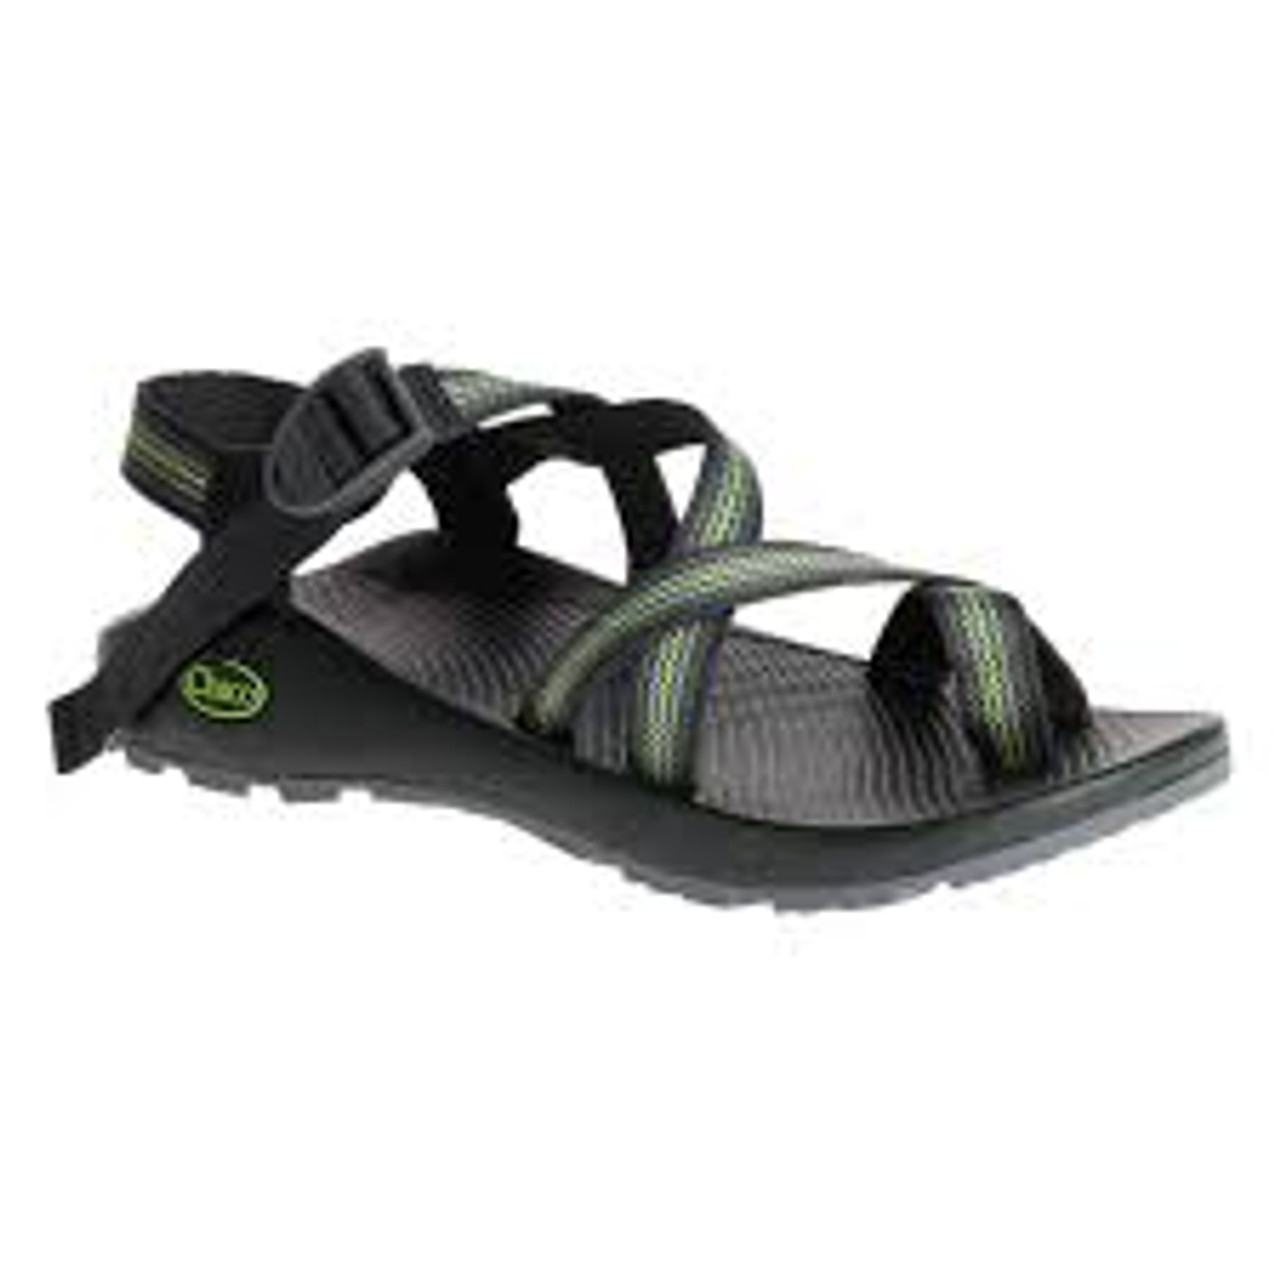 Chaco - Z/2 Classic - Split Black - Surf and Dirt